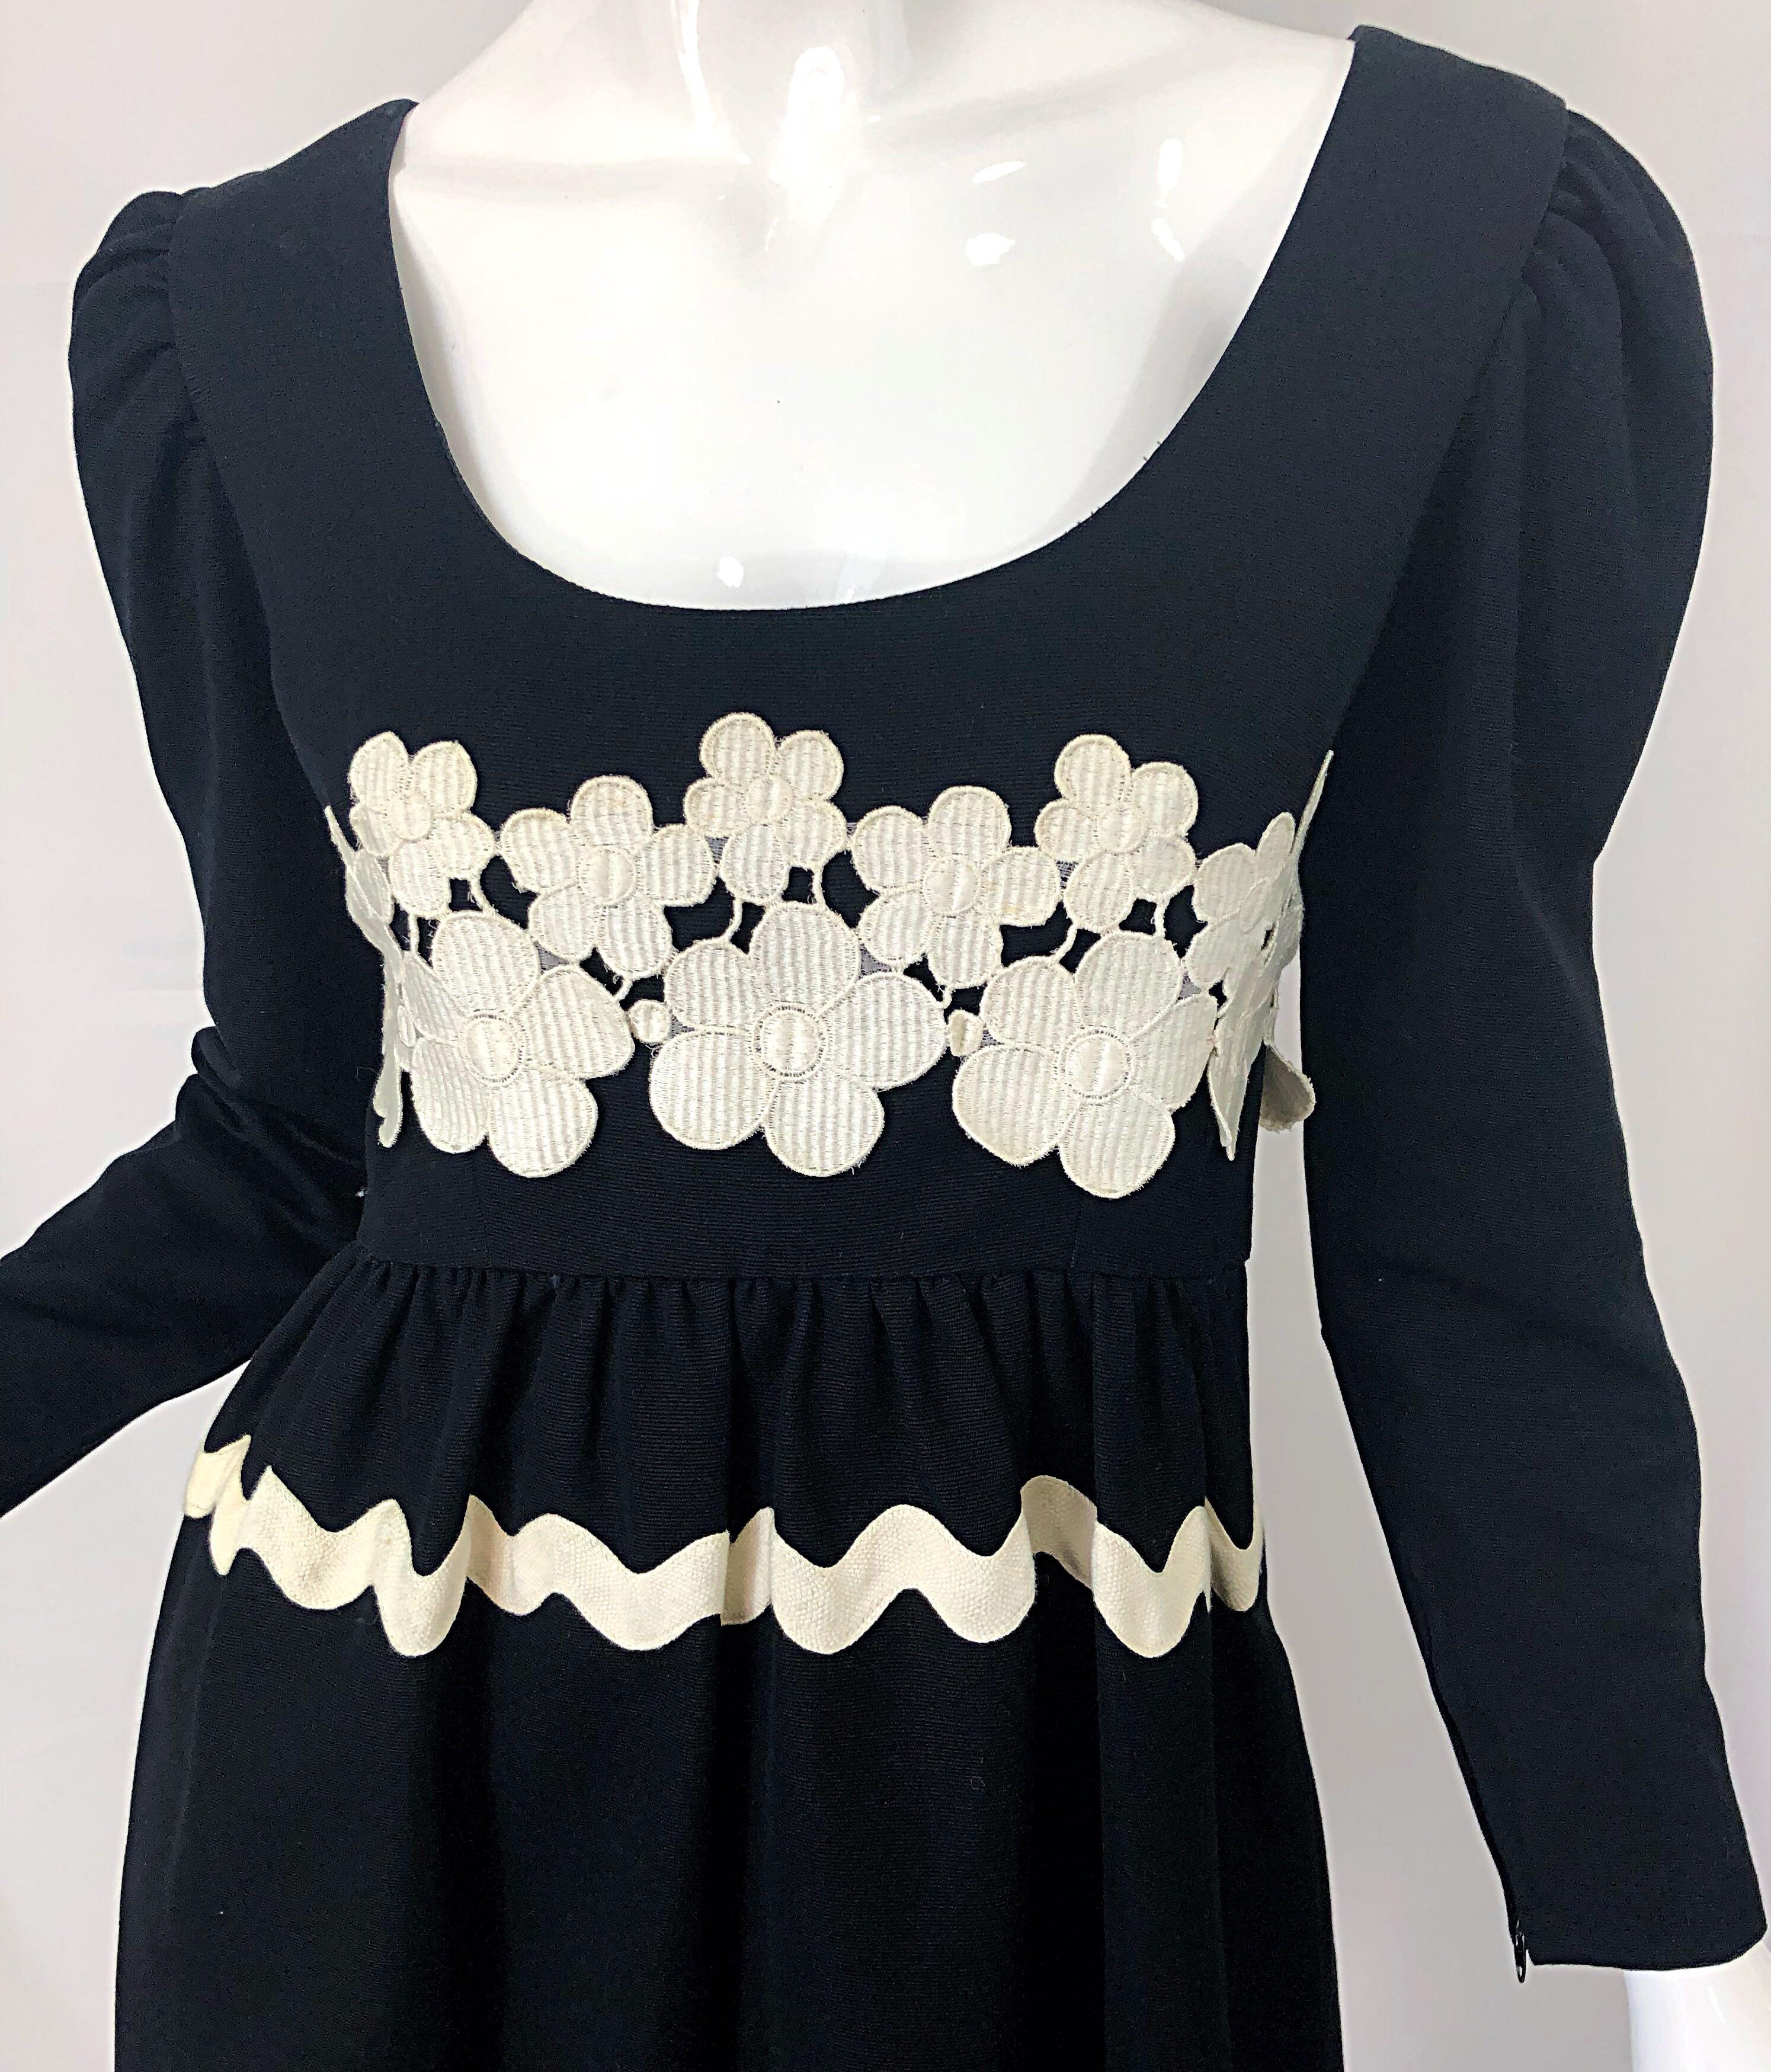 black dress with white embroidered flowers